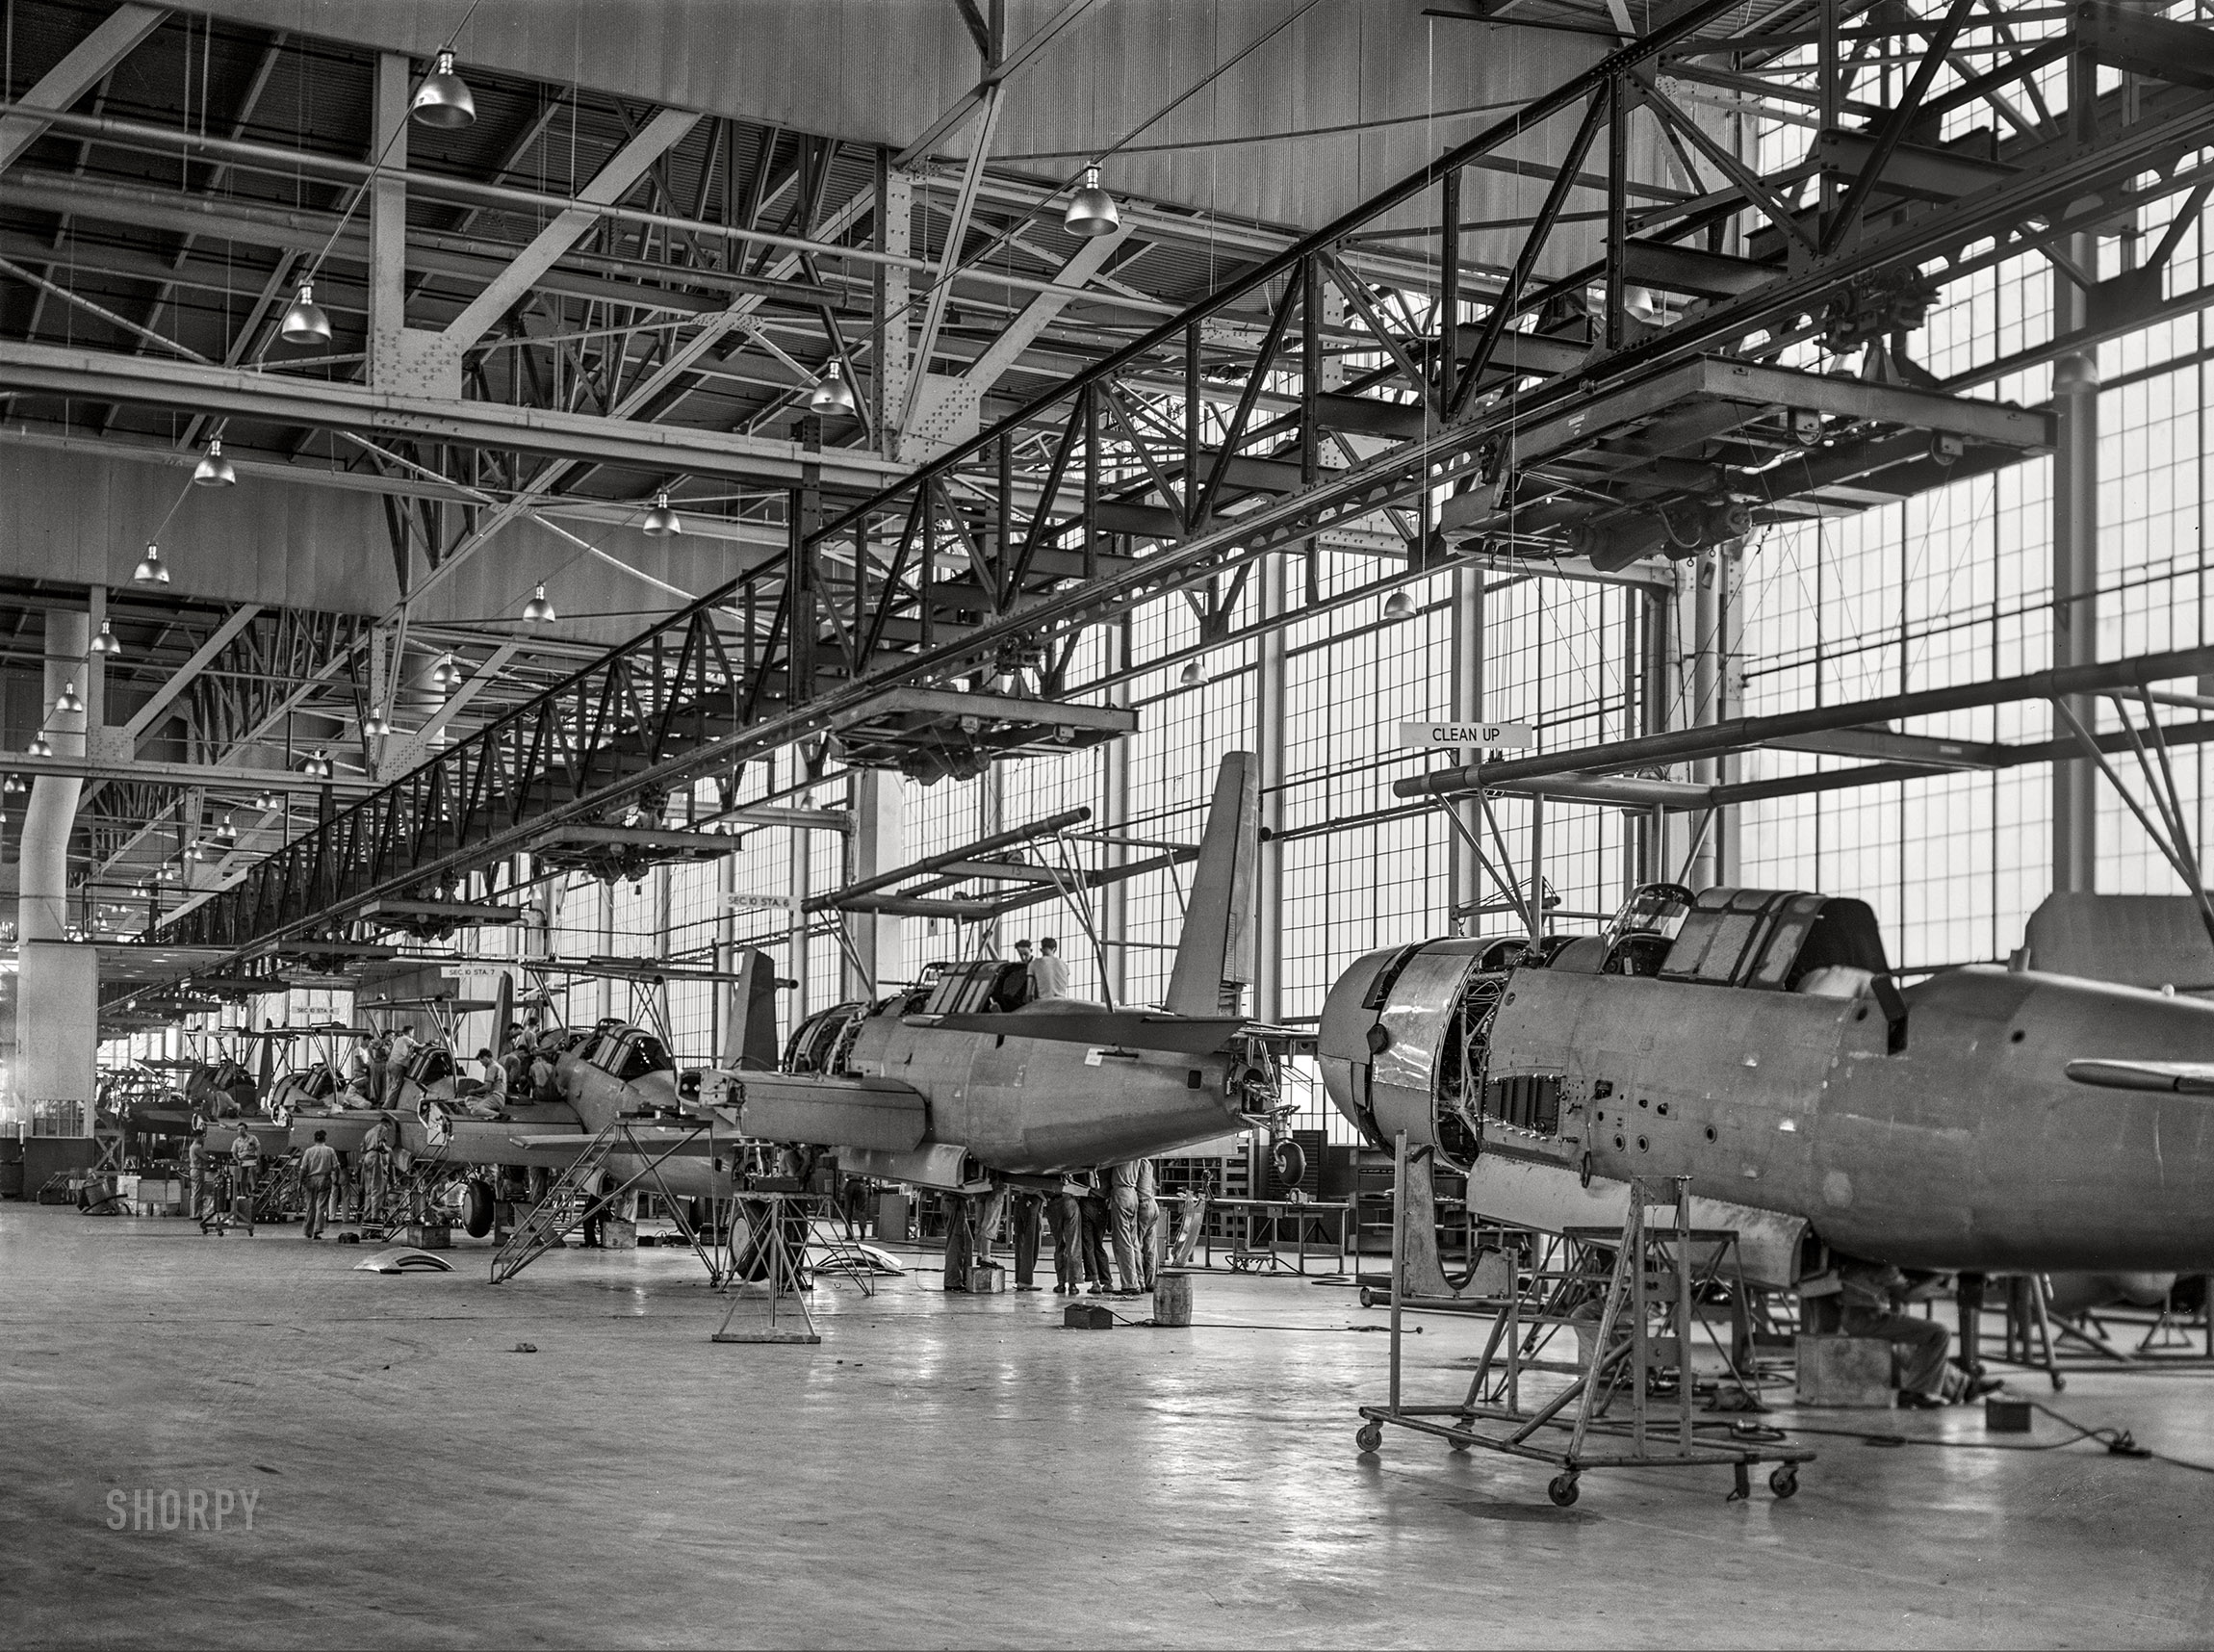 August 1942. "Nashville, Tennessee. Production of 'Vengeance' (V72) dive bombers. Assembly line at the Vultee Aircraft Corporation plant." Acetate negative by Jack Delano. View full size.